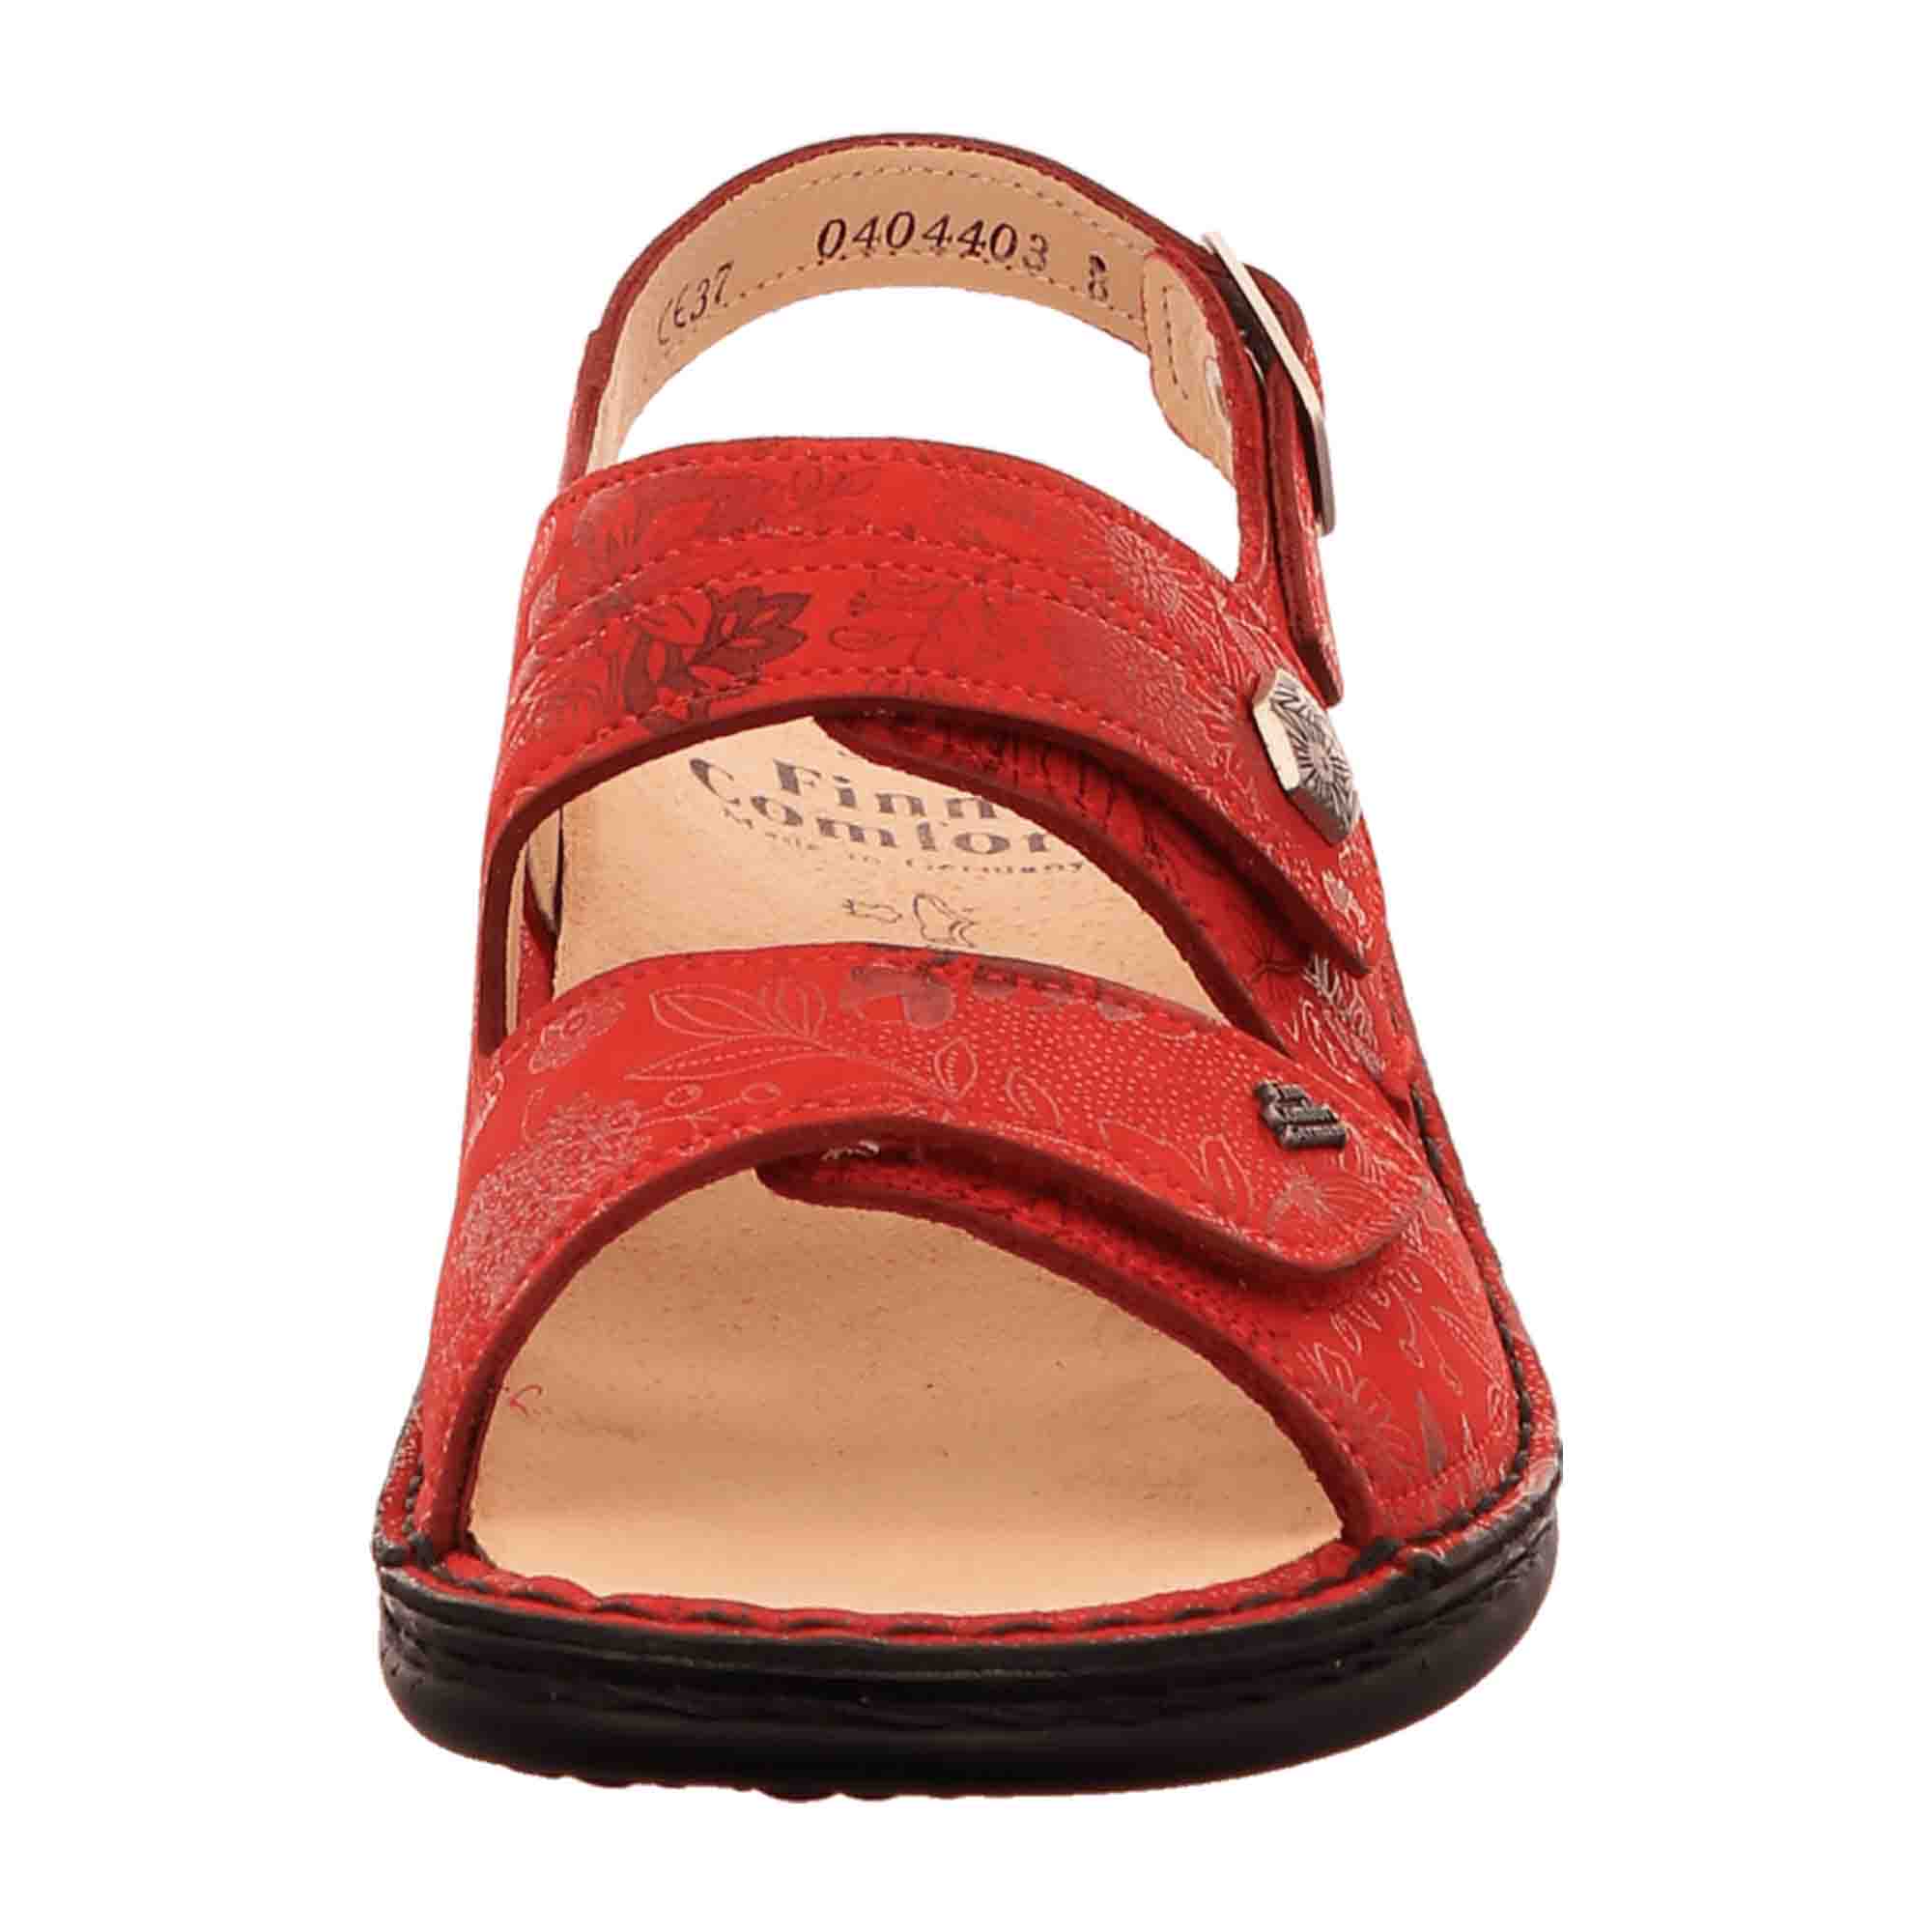 Finn Comfort Milos Women's Sandals - Red Nubuck Leather with Flower Design and Metal Brooch, Adjustable Fit